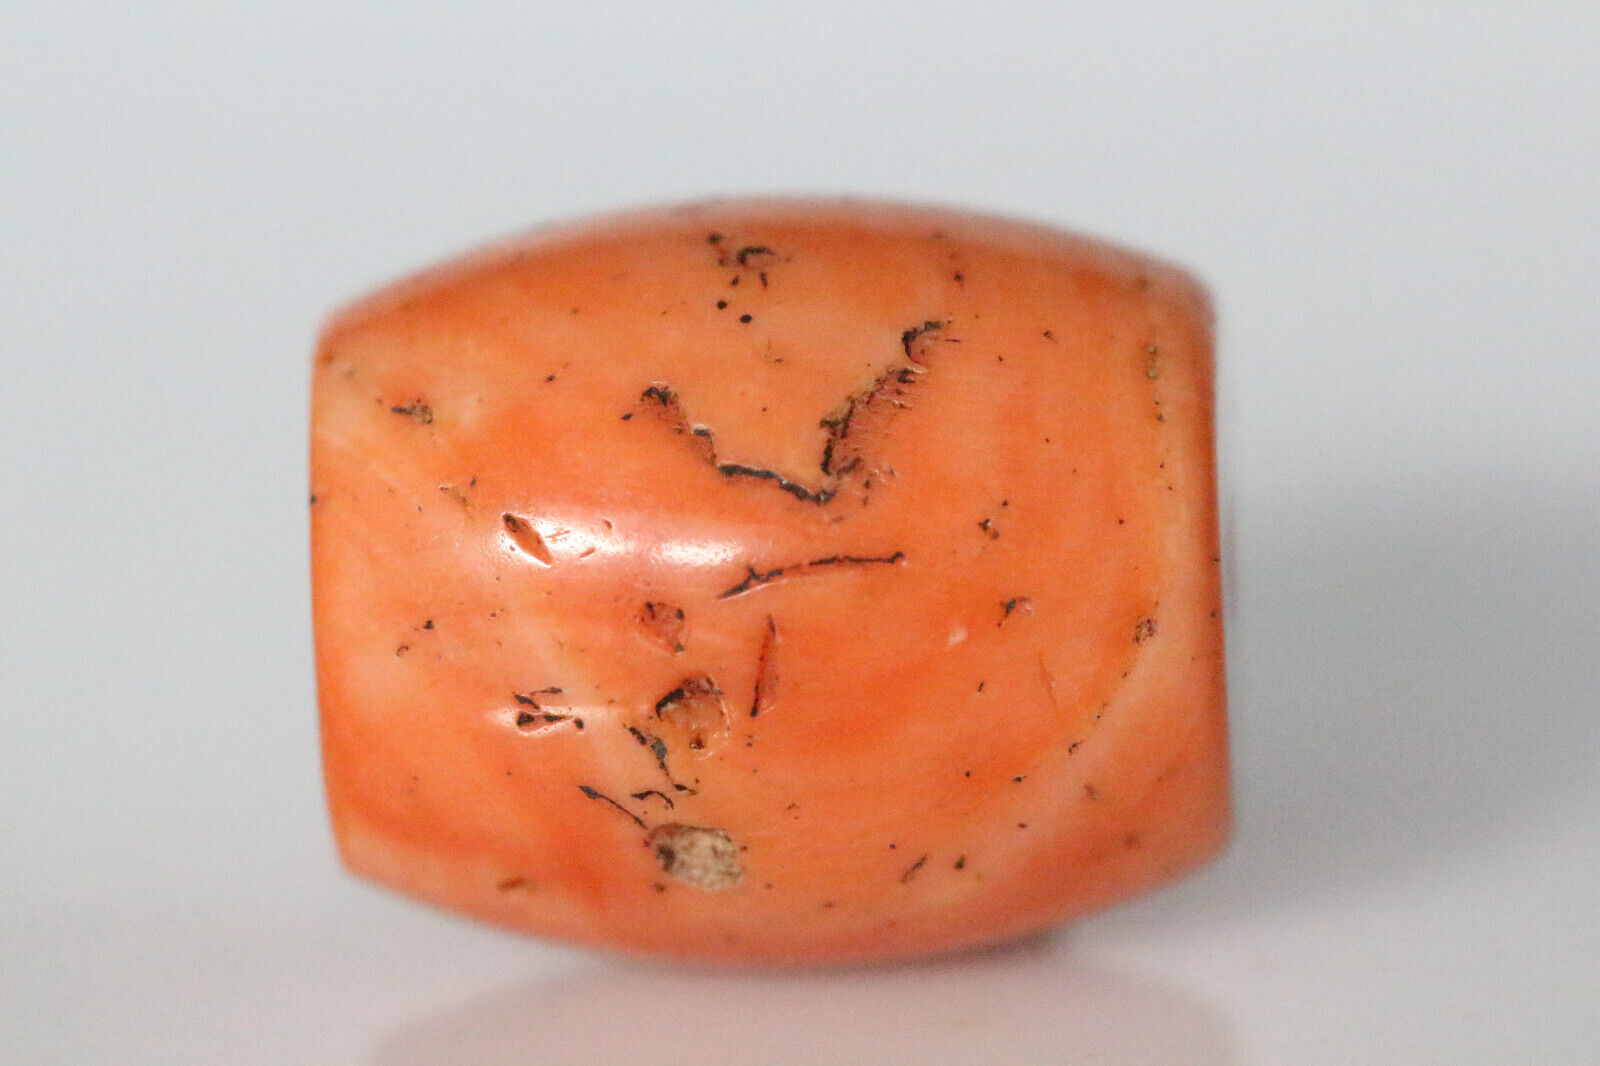 Exceptional Antique Coral Bead. Tibetan Rare and HUGE Coral Bead. 23 mm 13.8 Grs